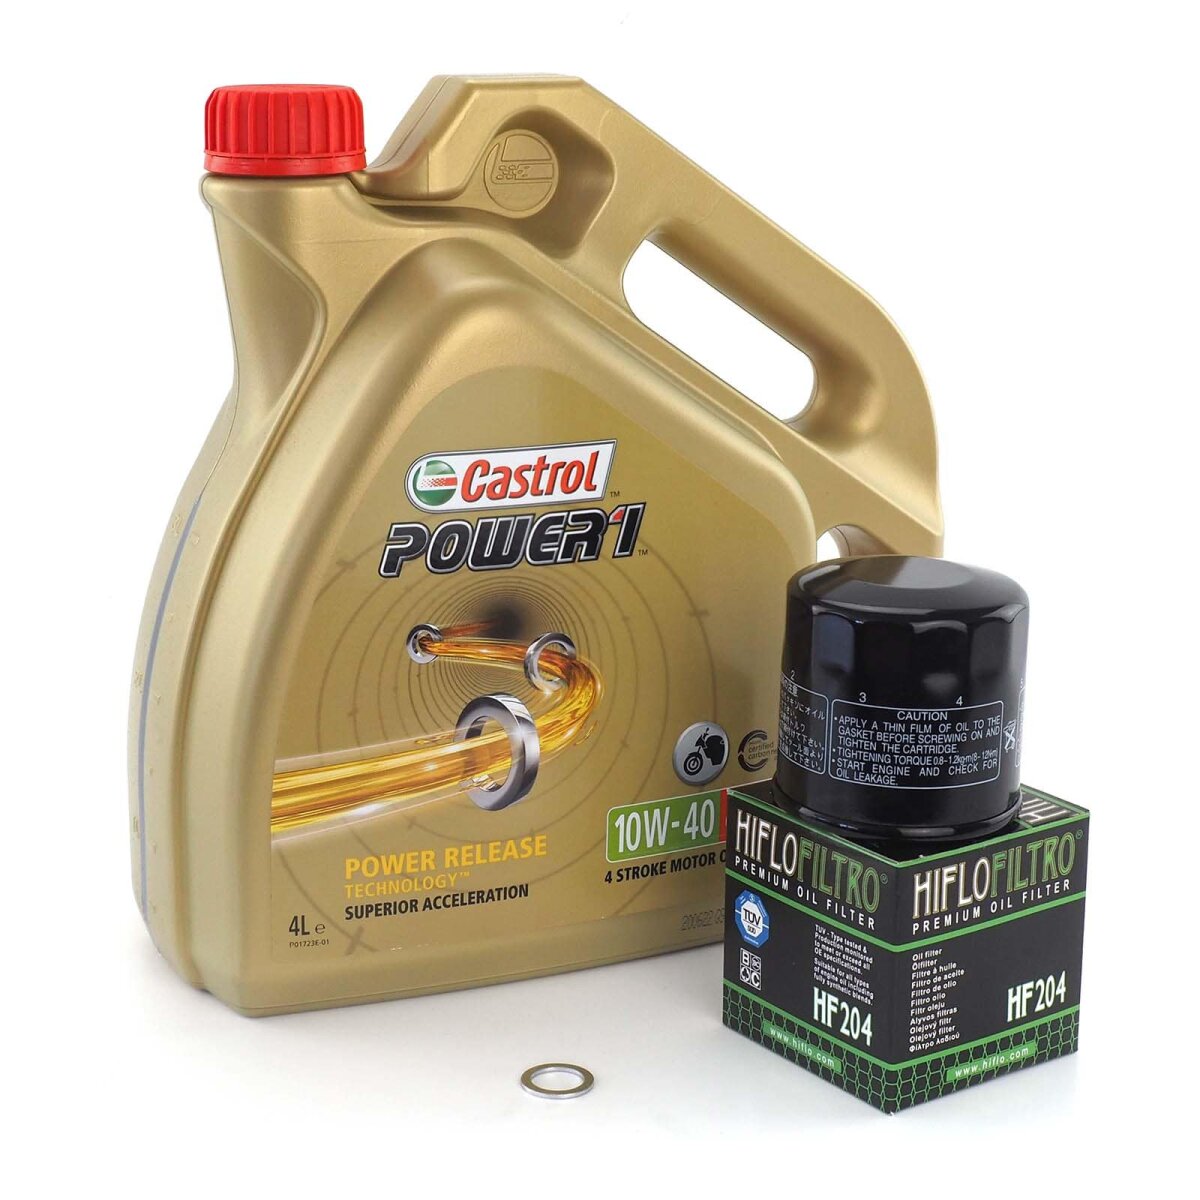 Castrol Engine Oil Change Kit Configurator with Oil Filter and Sealin